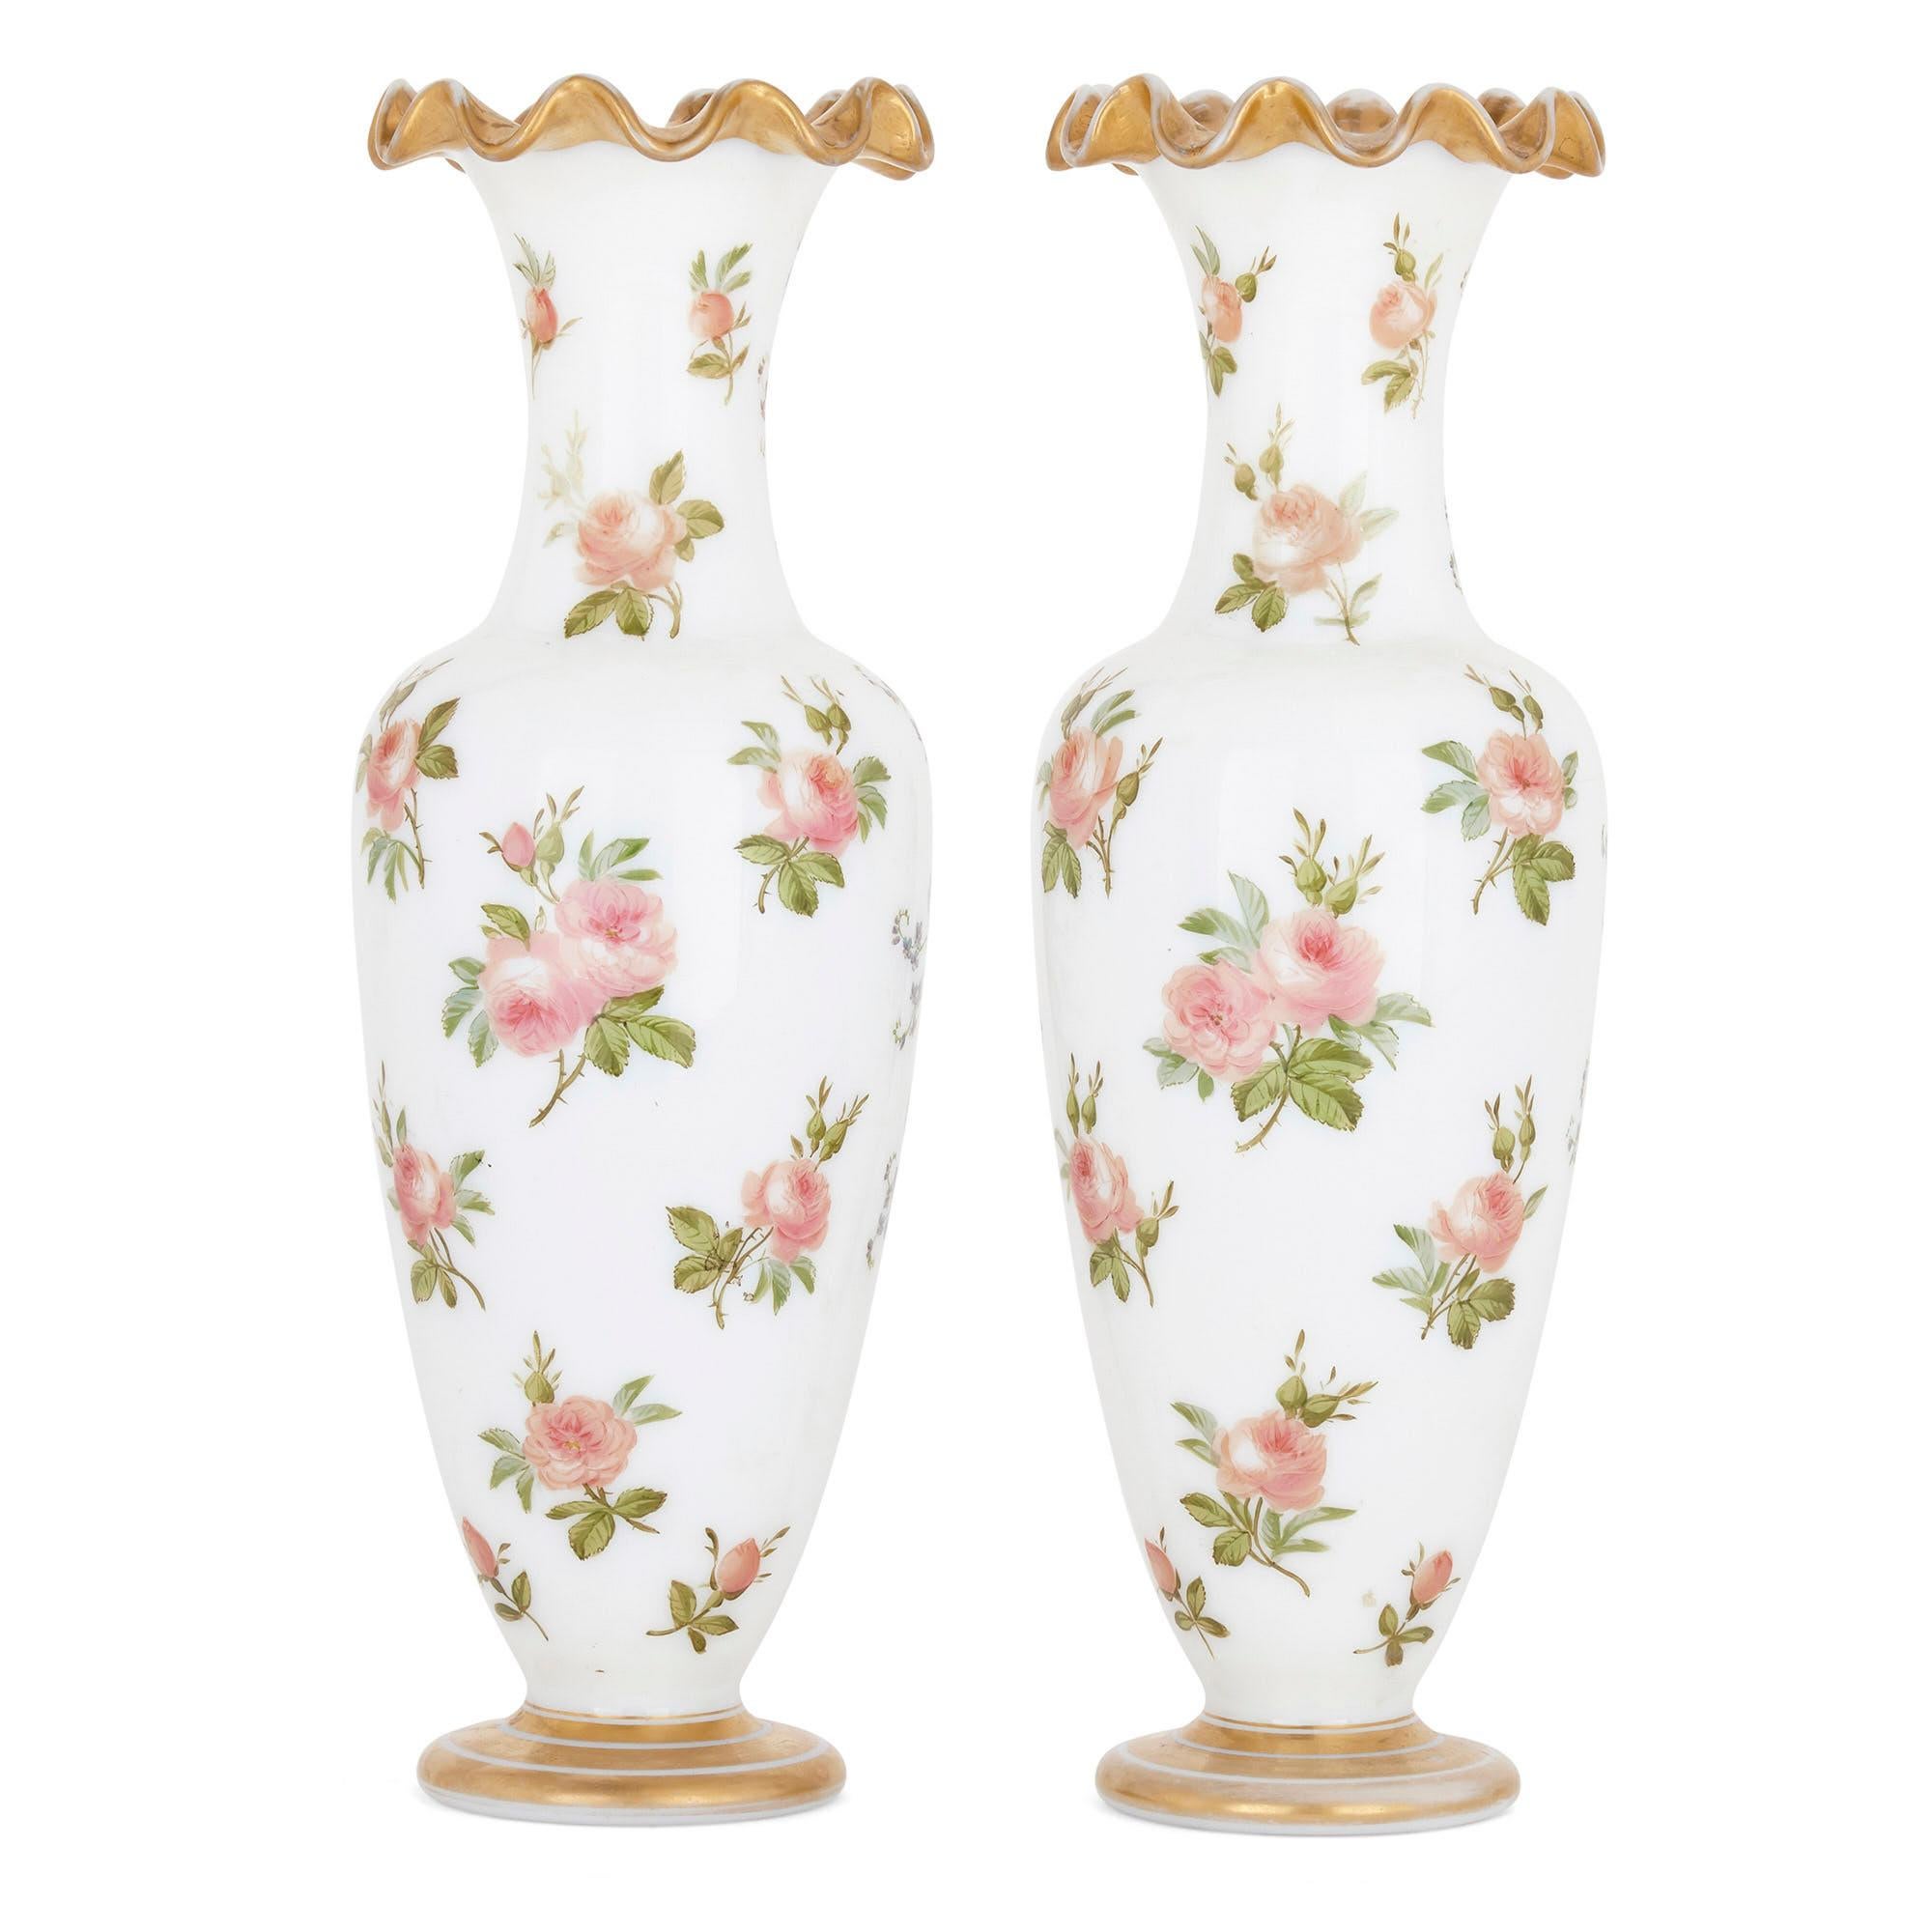 French Pair of Mid-19th Century Baccarat Enameled Glass Vases